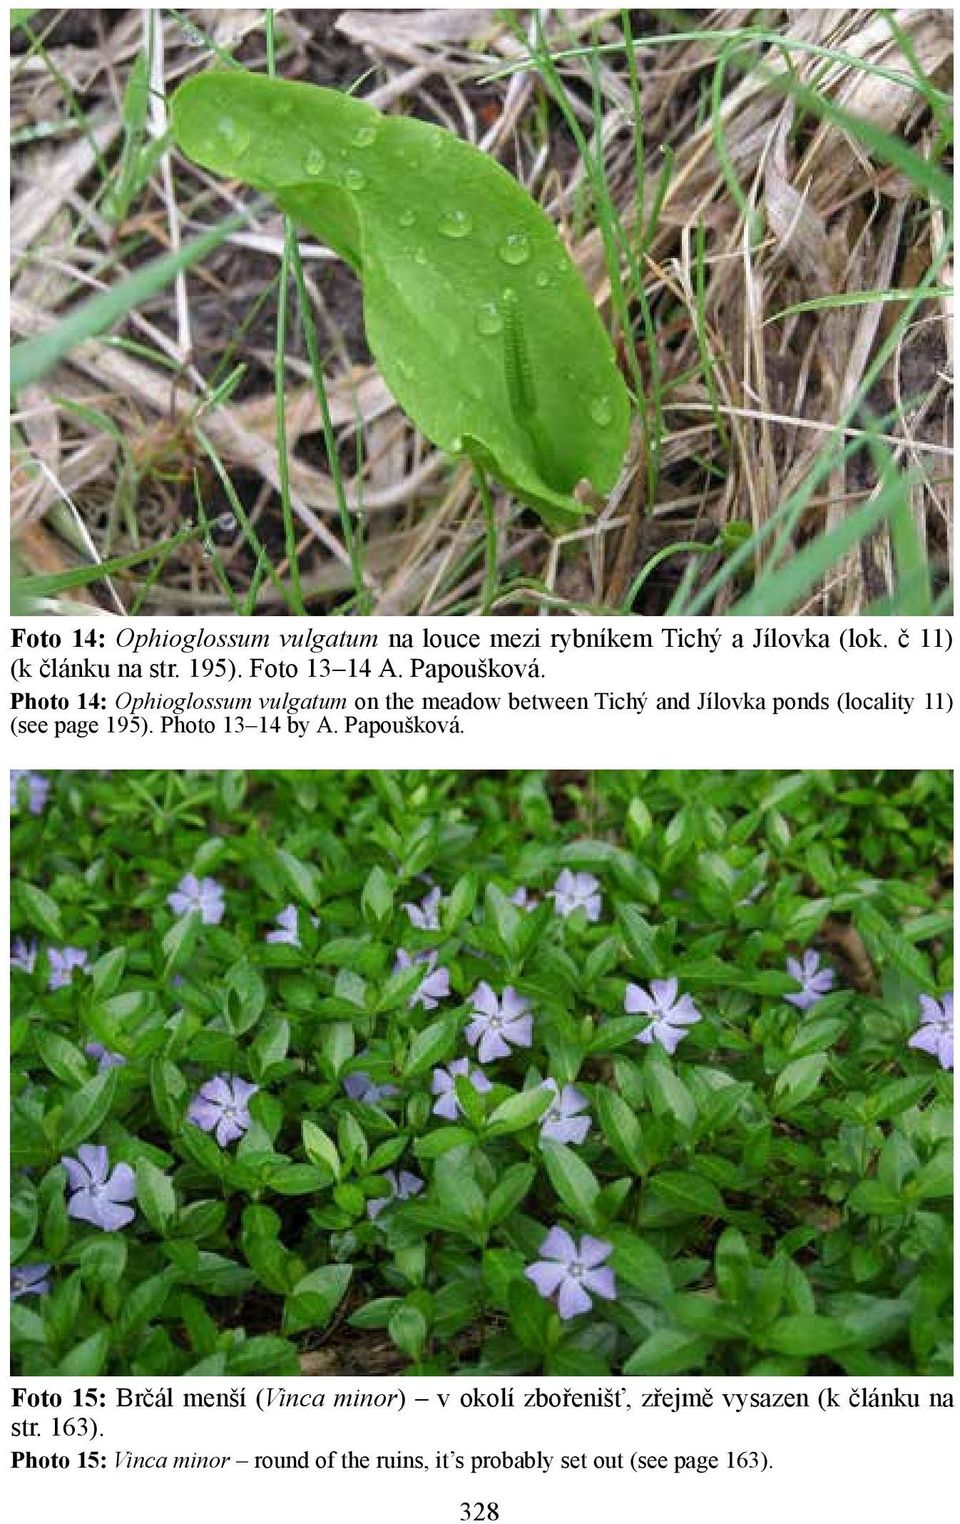 Photo 14: Ophioglossum vulgatum on the meadow between Tichý and Jílovka ponds (locality 11) (see page 195).